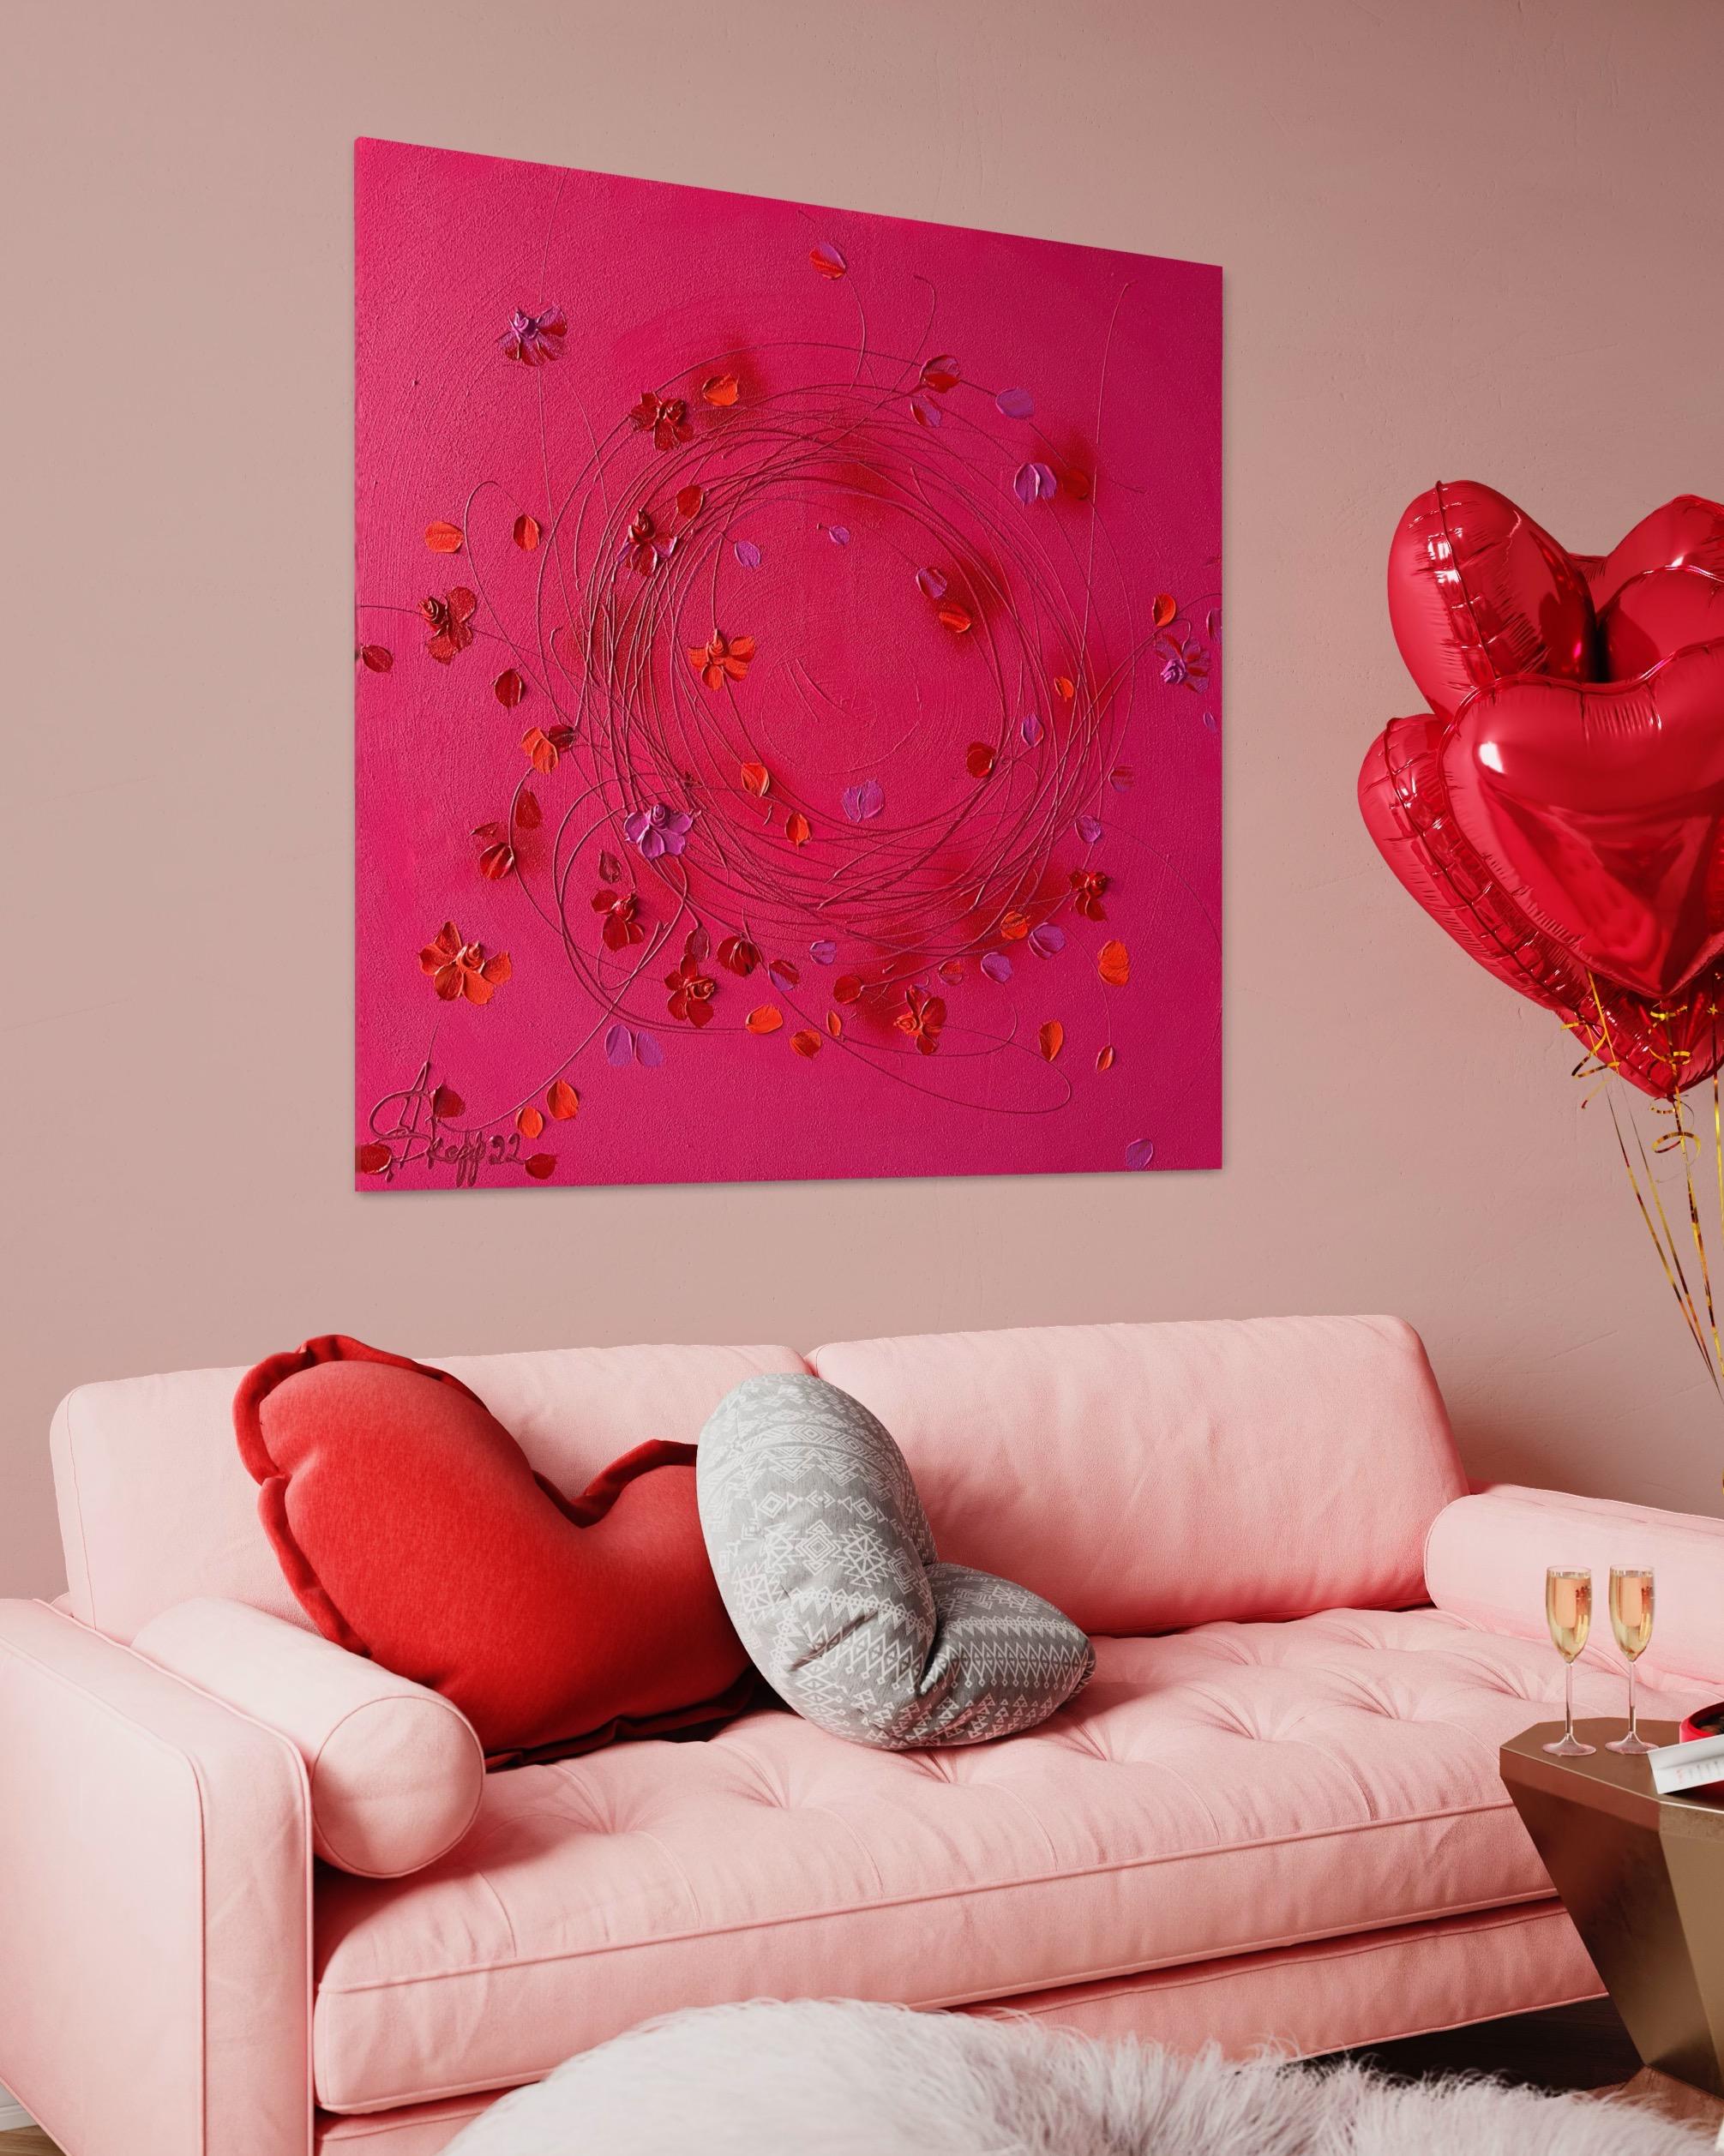 Introducing a stunning floral masterpiece in the Pantone Color of the Year for 2023 - Viva Magenta. This acrylic textured artwork on canvas measures 90x90x2 cm and features a captivating display of red roses that are three-dimensional and centrally